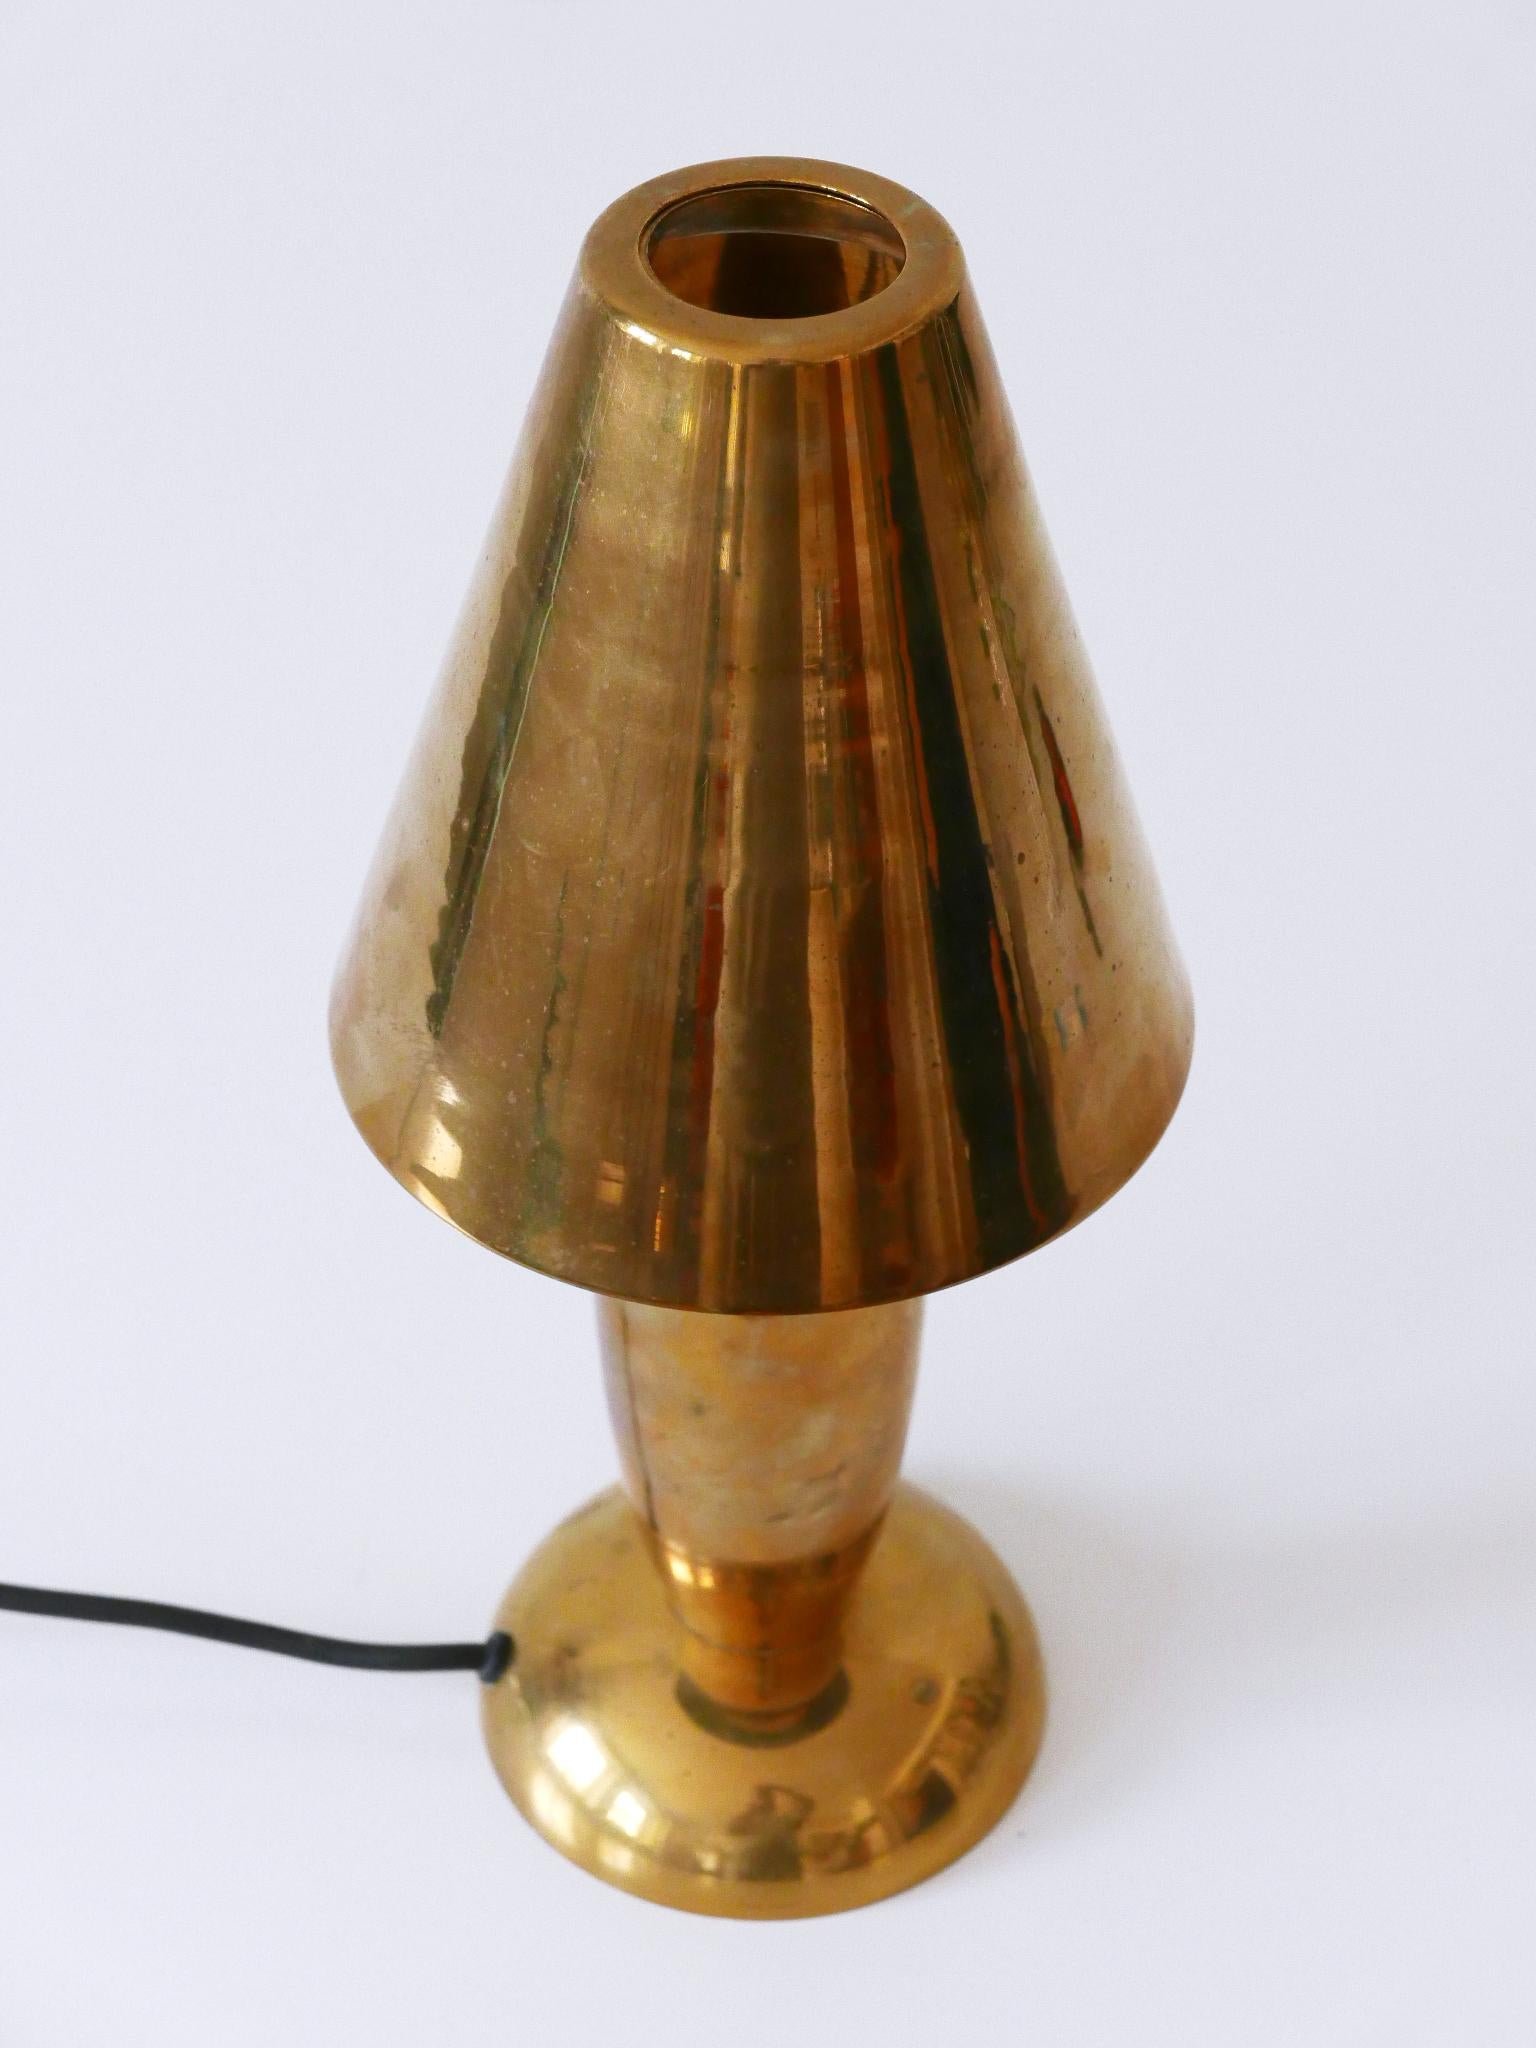 Rare & Lovely Mid-Century Modern Brass Side Table Lamp by Lambert Germany 1970s For Sale 9